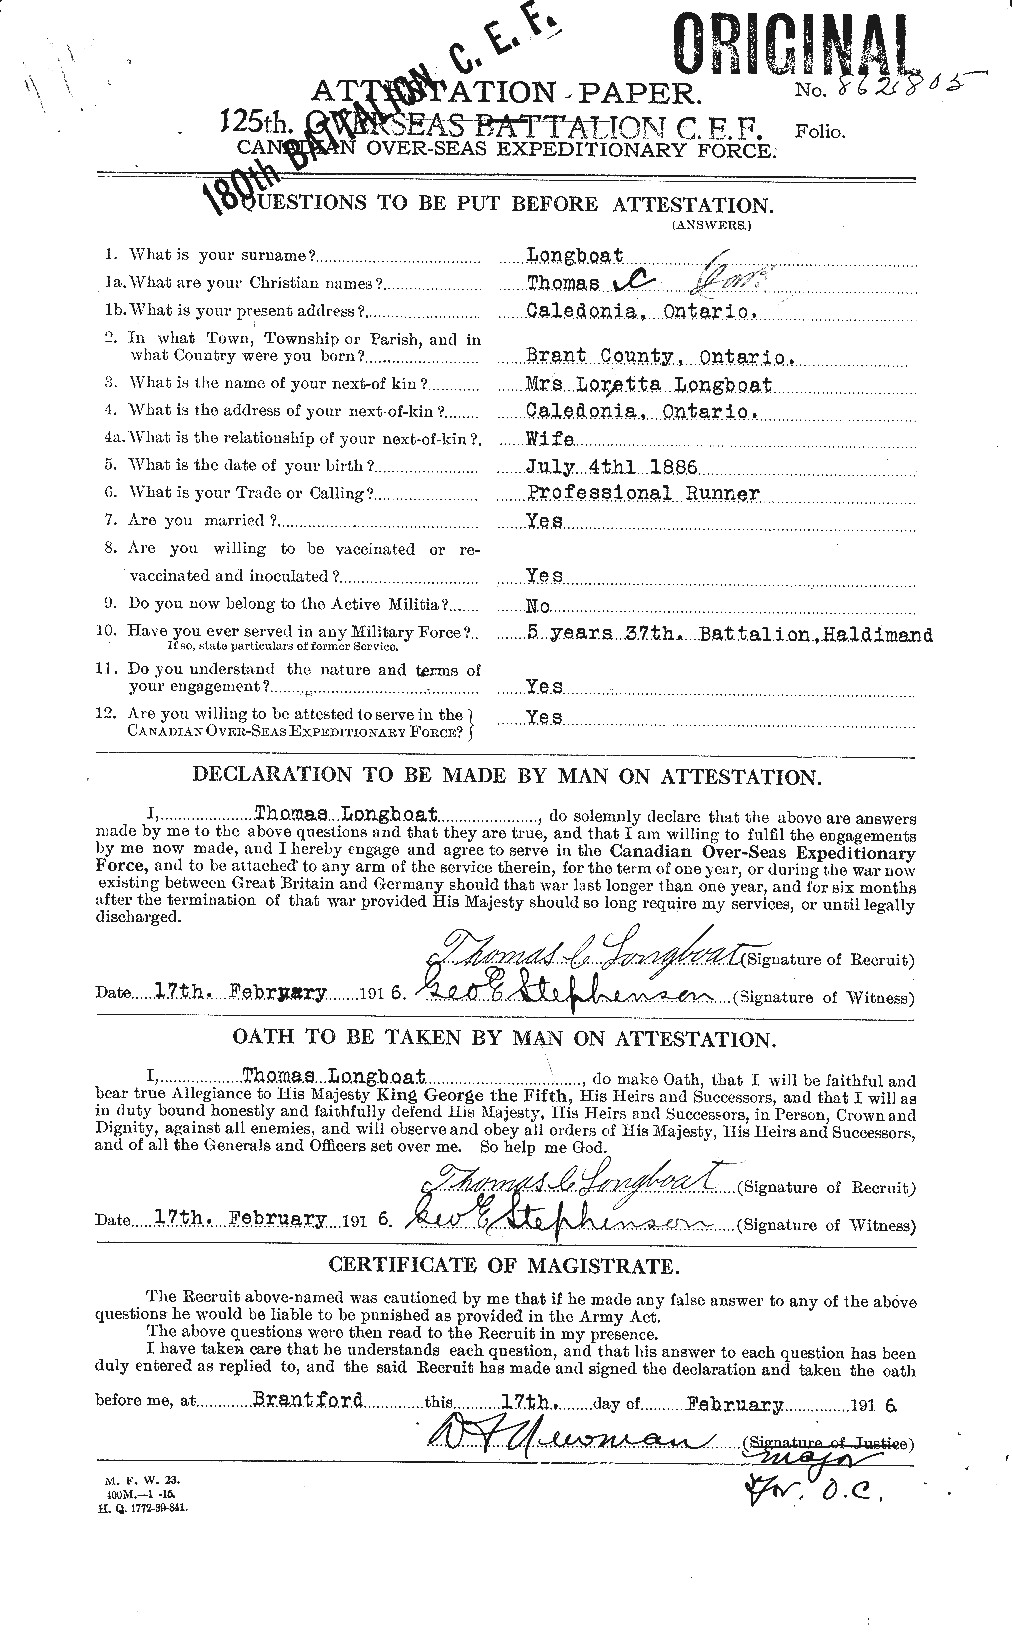 Personnel Records of the First World War - CEF 238864a